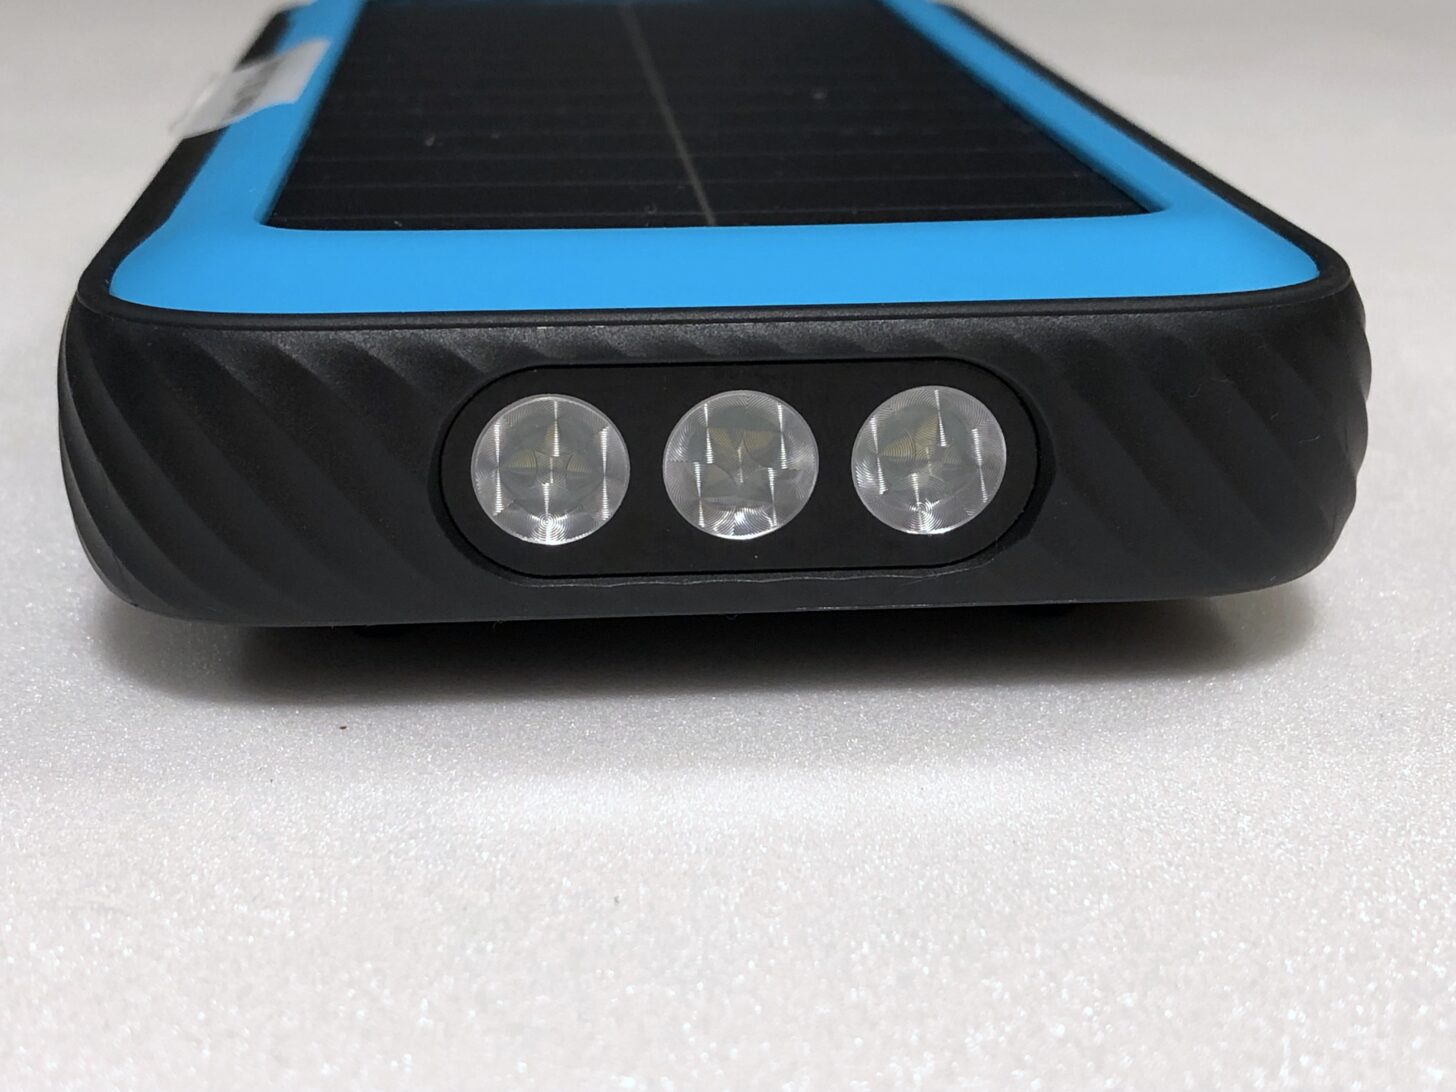 The Anker 20K Solar showing three white LEDs at one end.